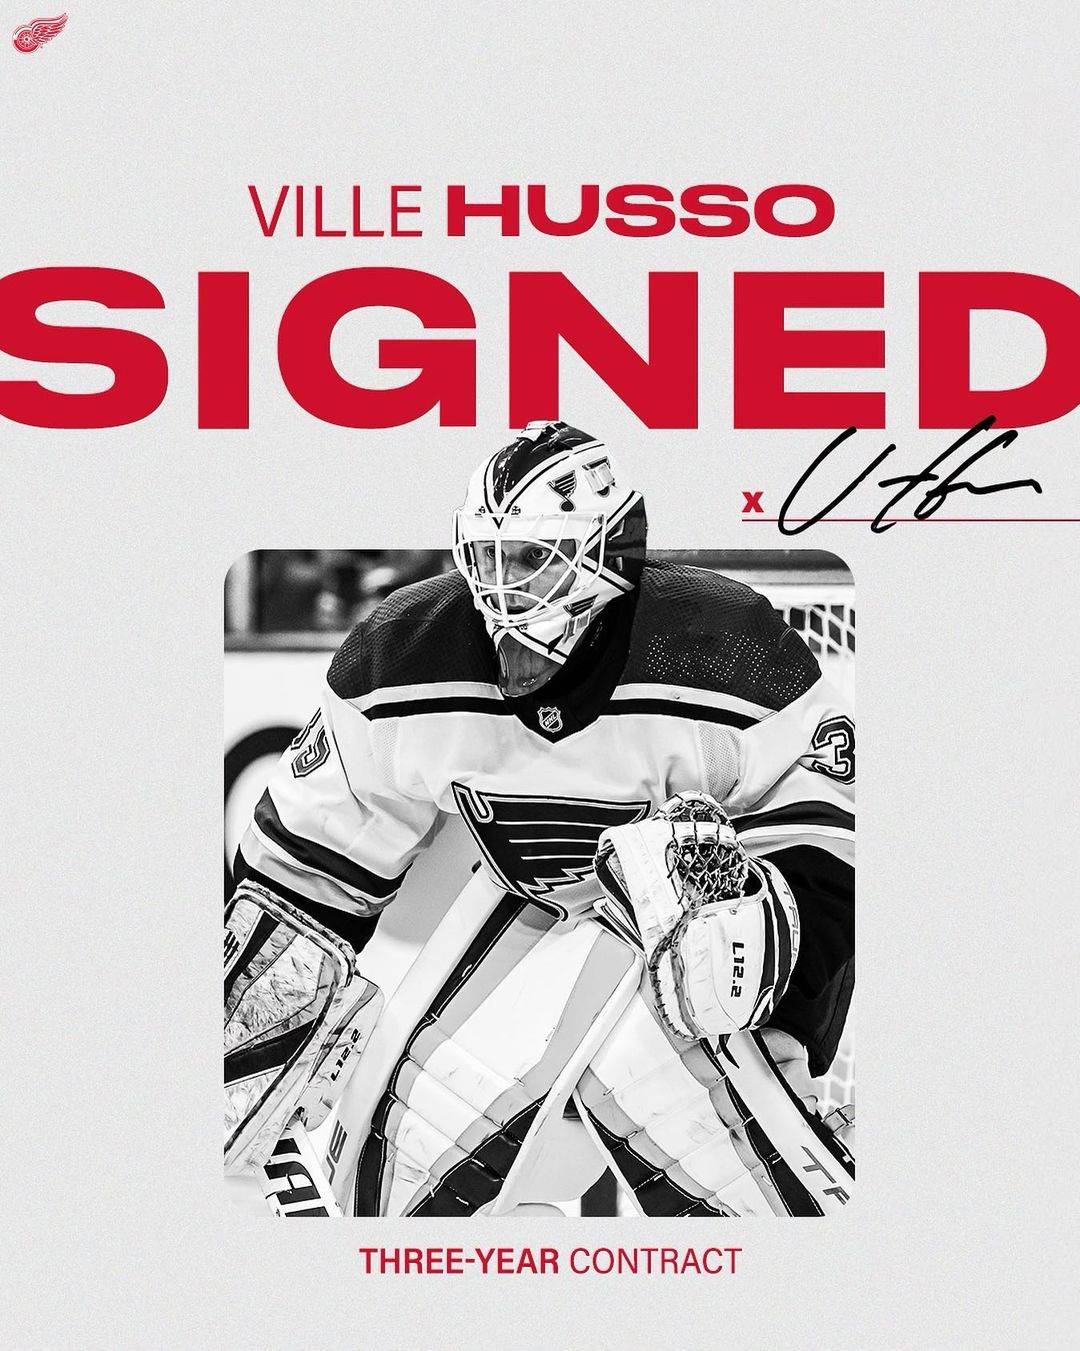 UPDATE: The Detroit #RedWings signed goaltender Ville Husso to a three-year cont...